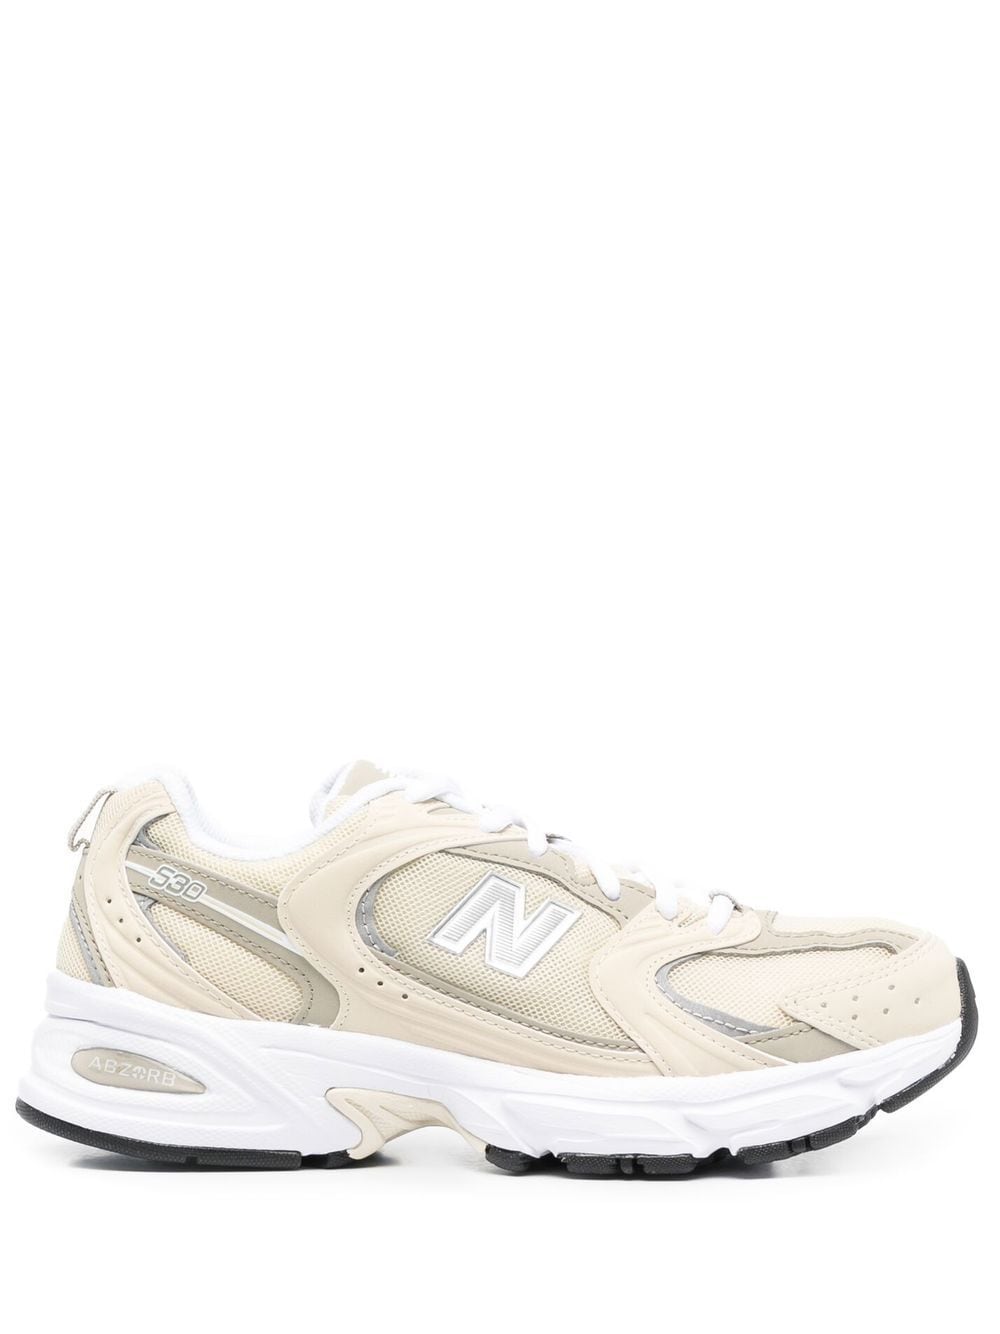 New Balance MR530 low-top sneakers - Neutrals